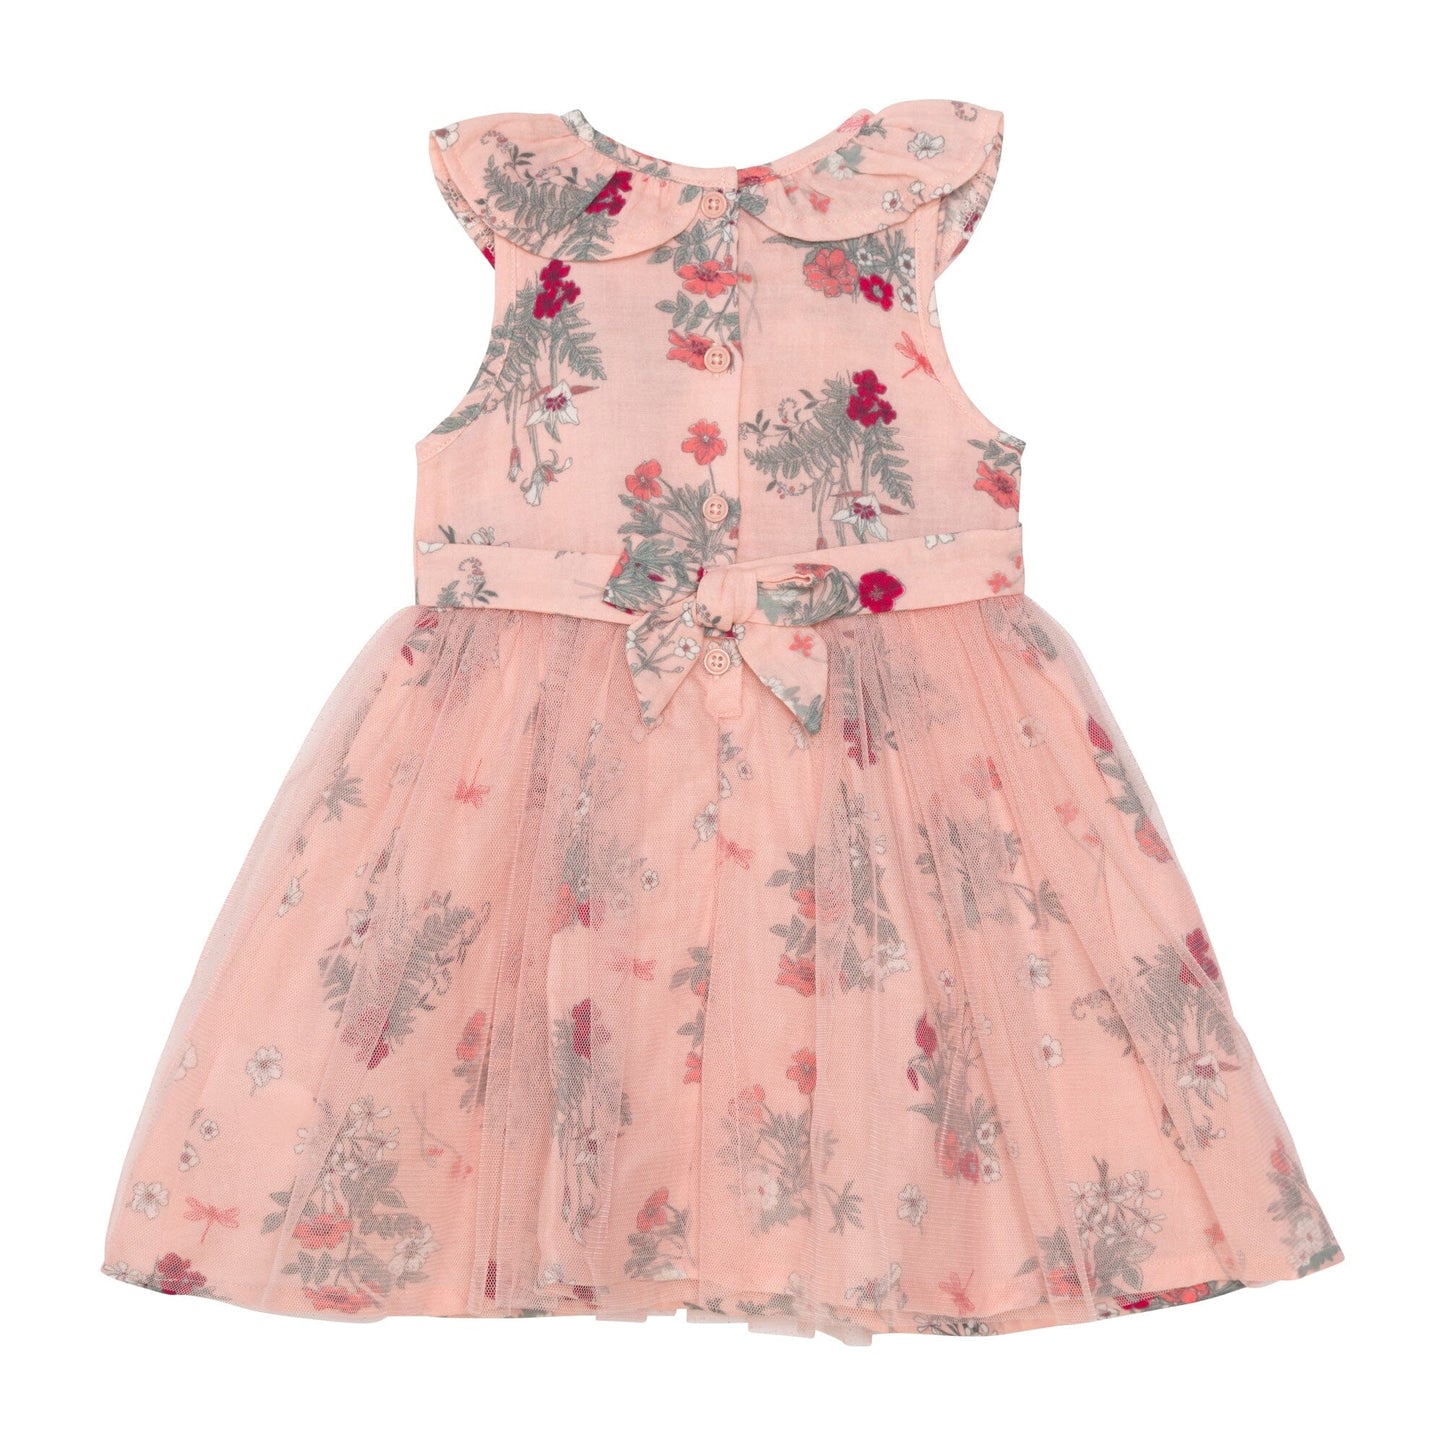 Printed Short Sleeve Dress With Tulle Skirt Vintage Pink Botanical Flowers - E30H94_048